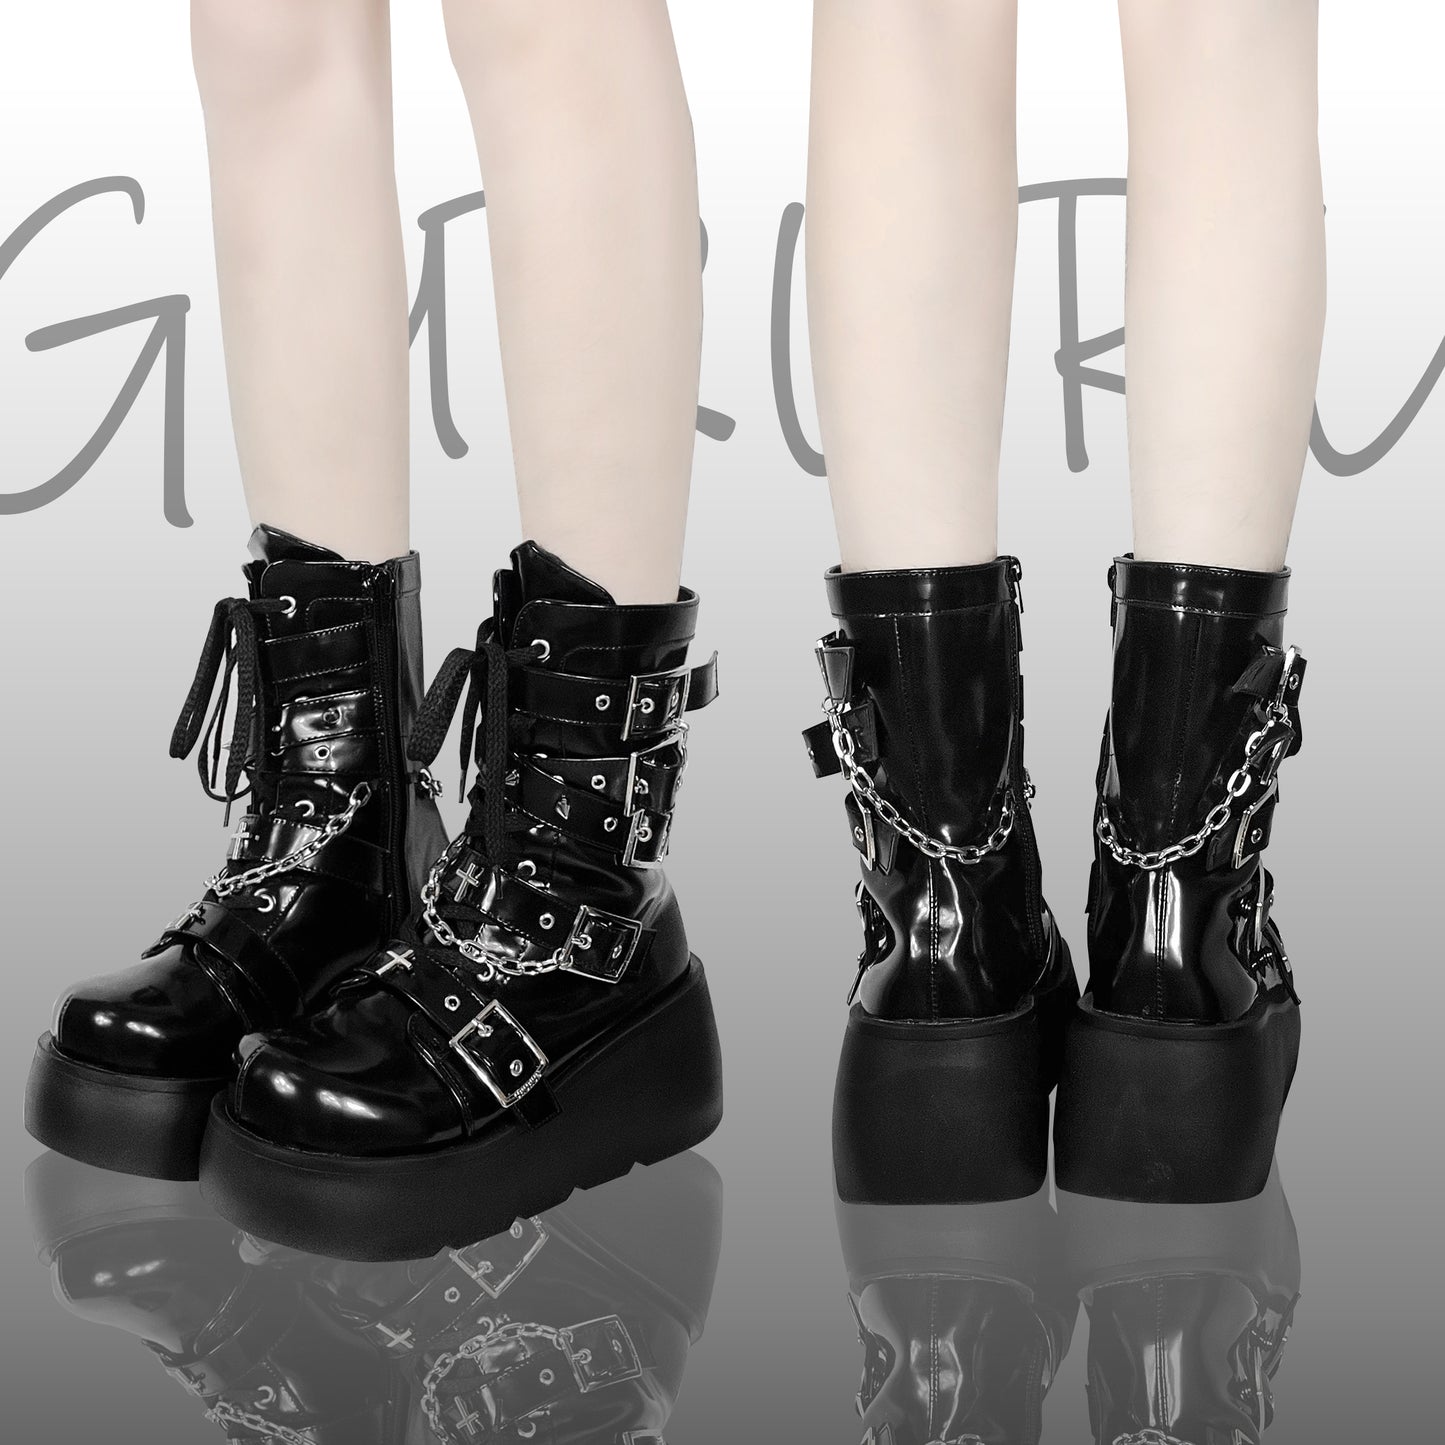 Y2K Spicy Girl Cross Black White Platform Shoes Boots 28962:343836